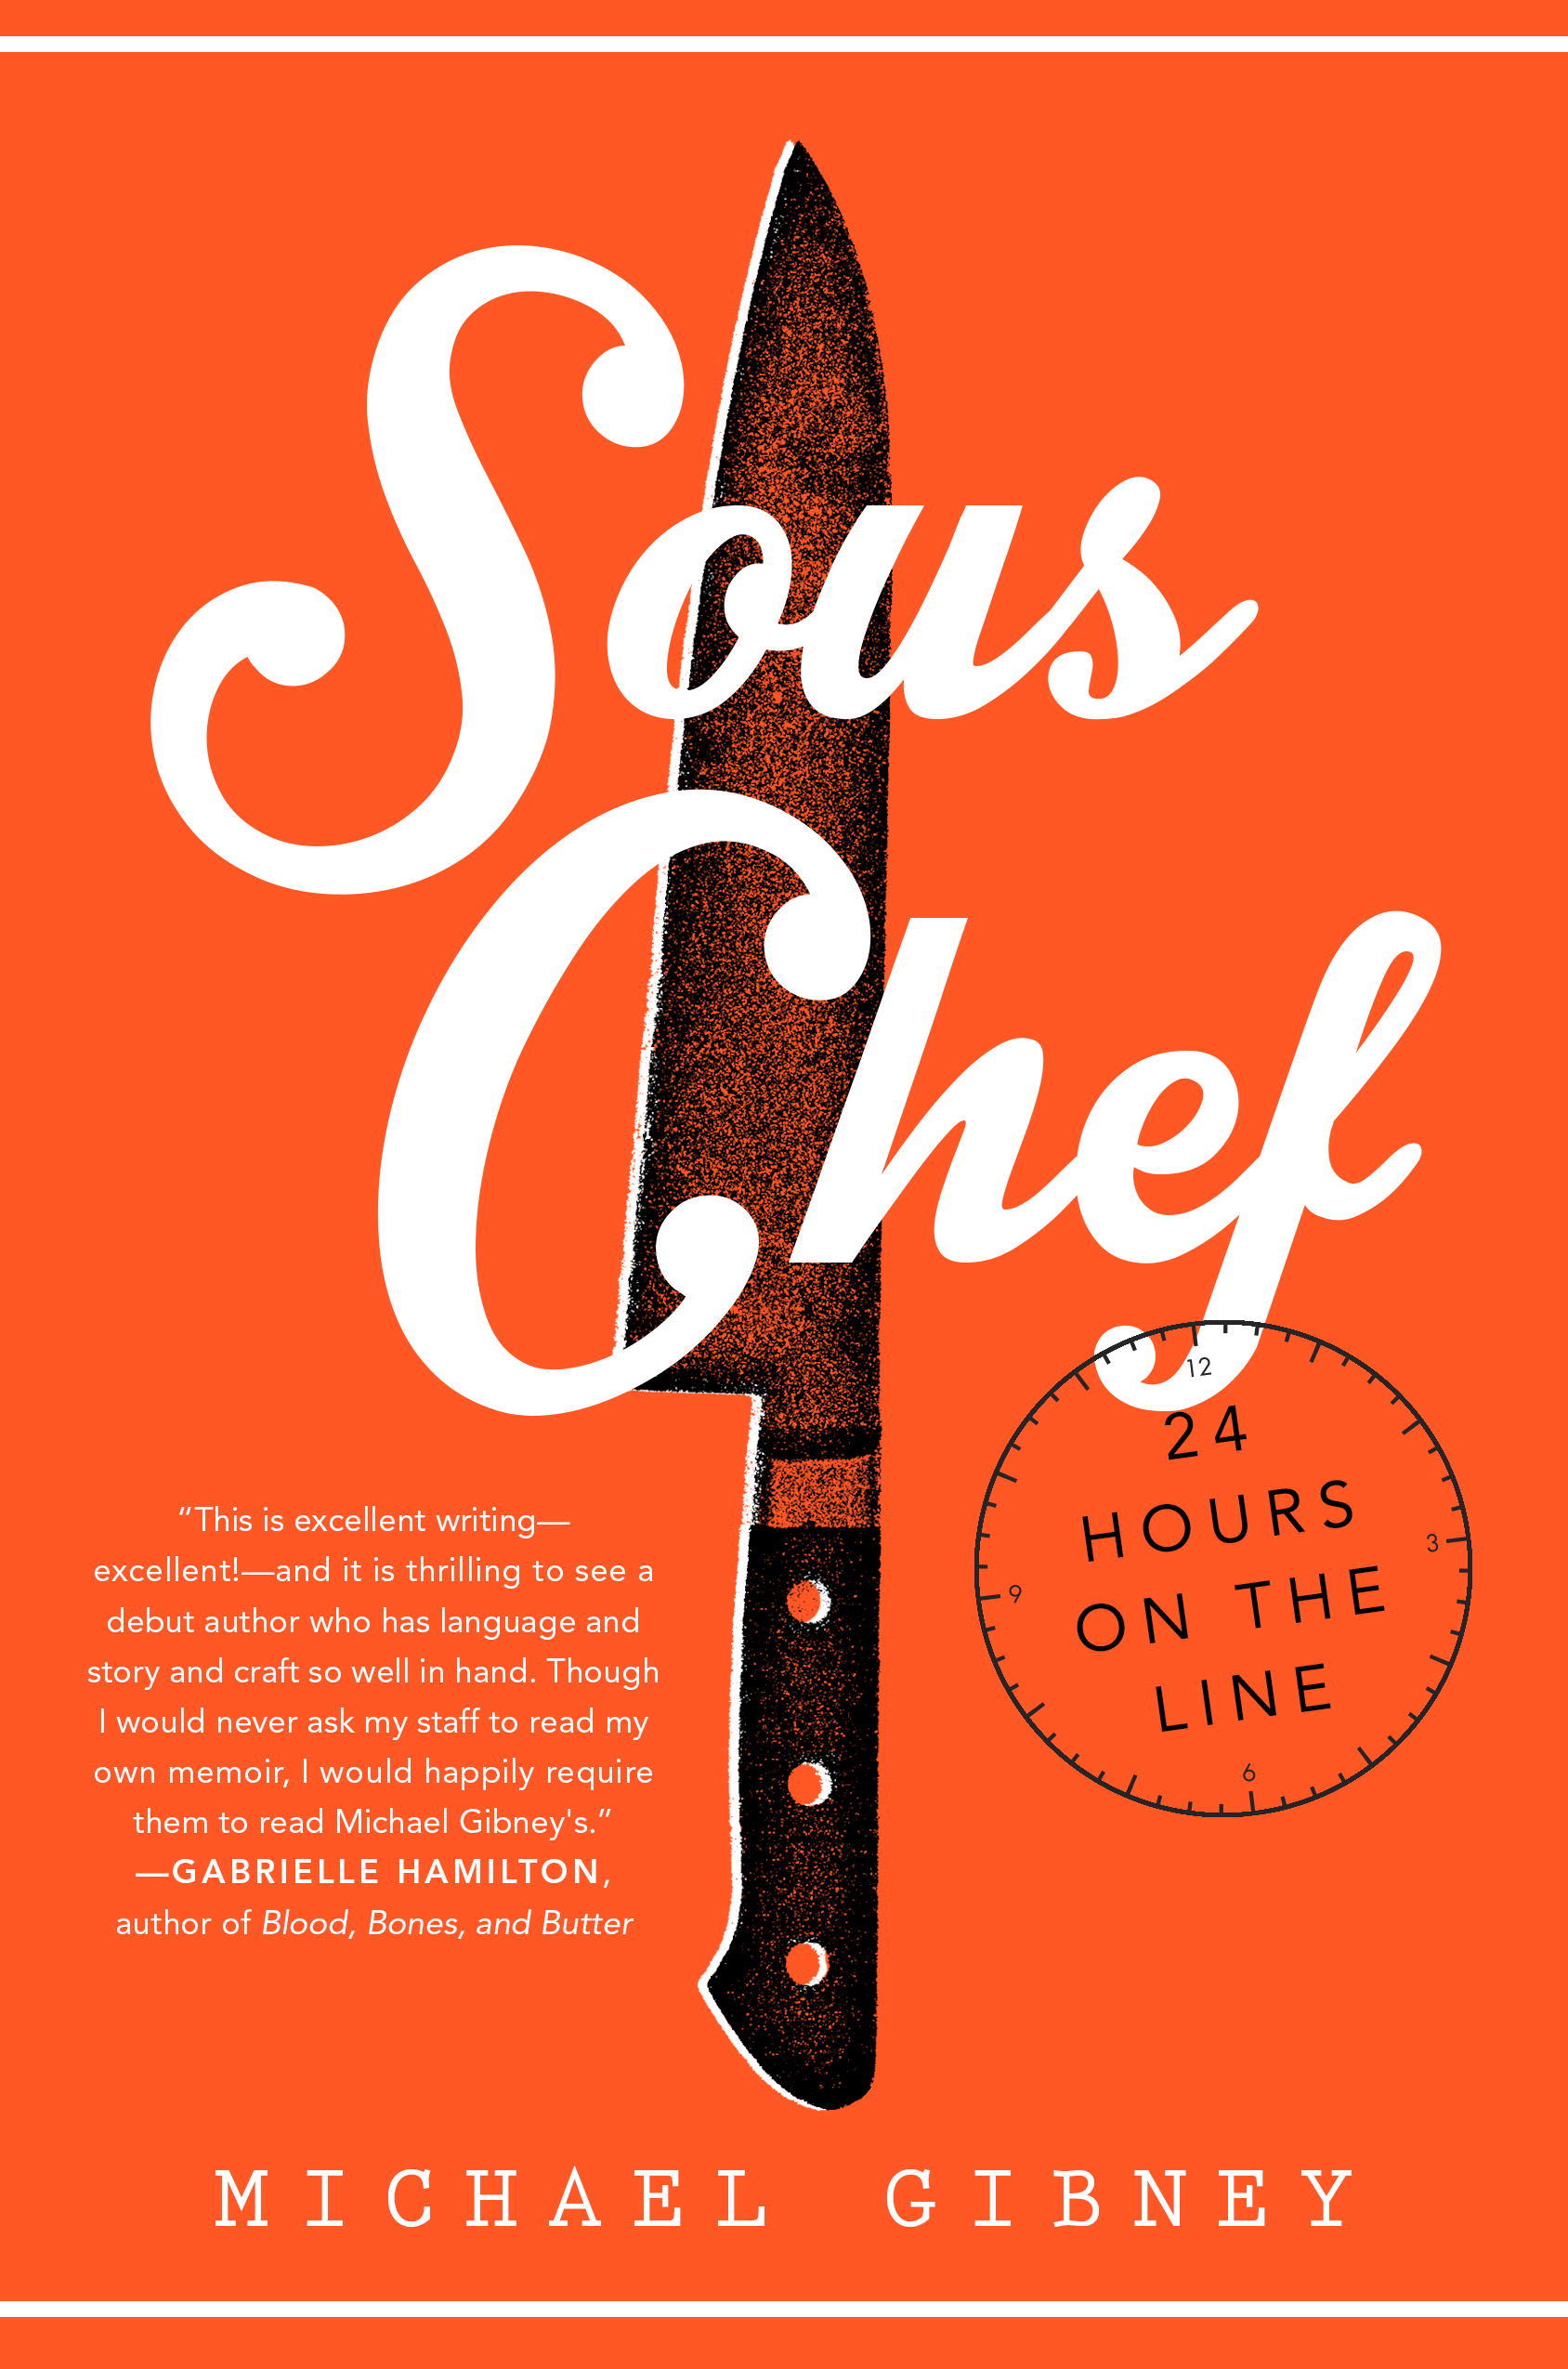 Michael Gibney's Sous Chef debuts tomorrow, March 25.